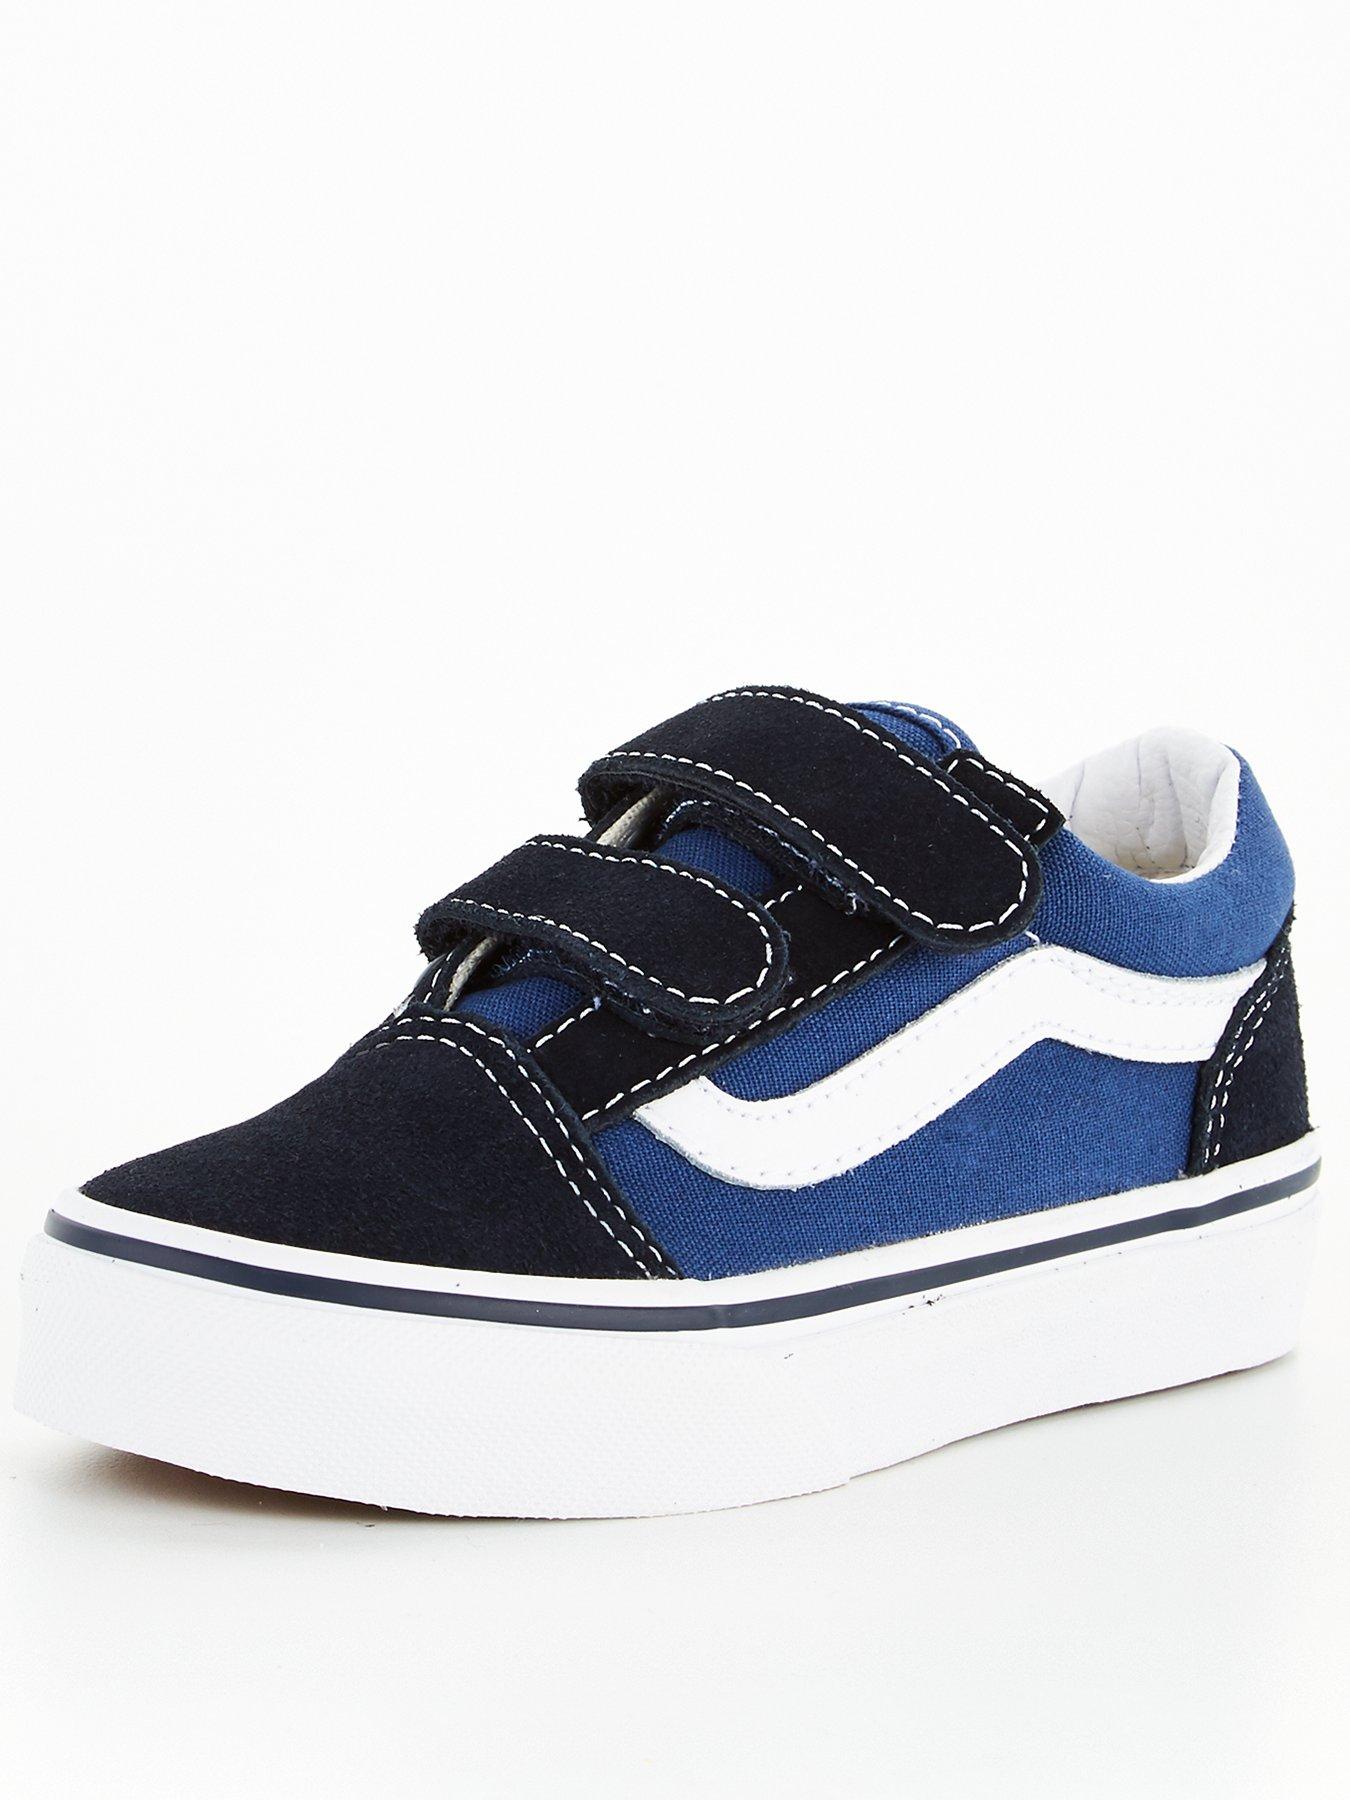 blue vans with straps